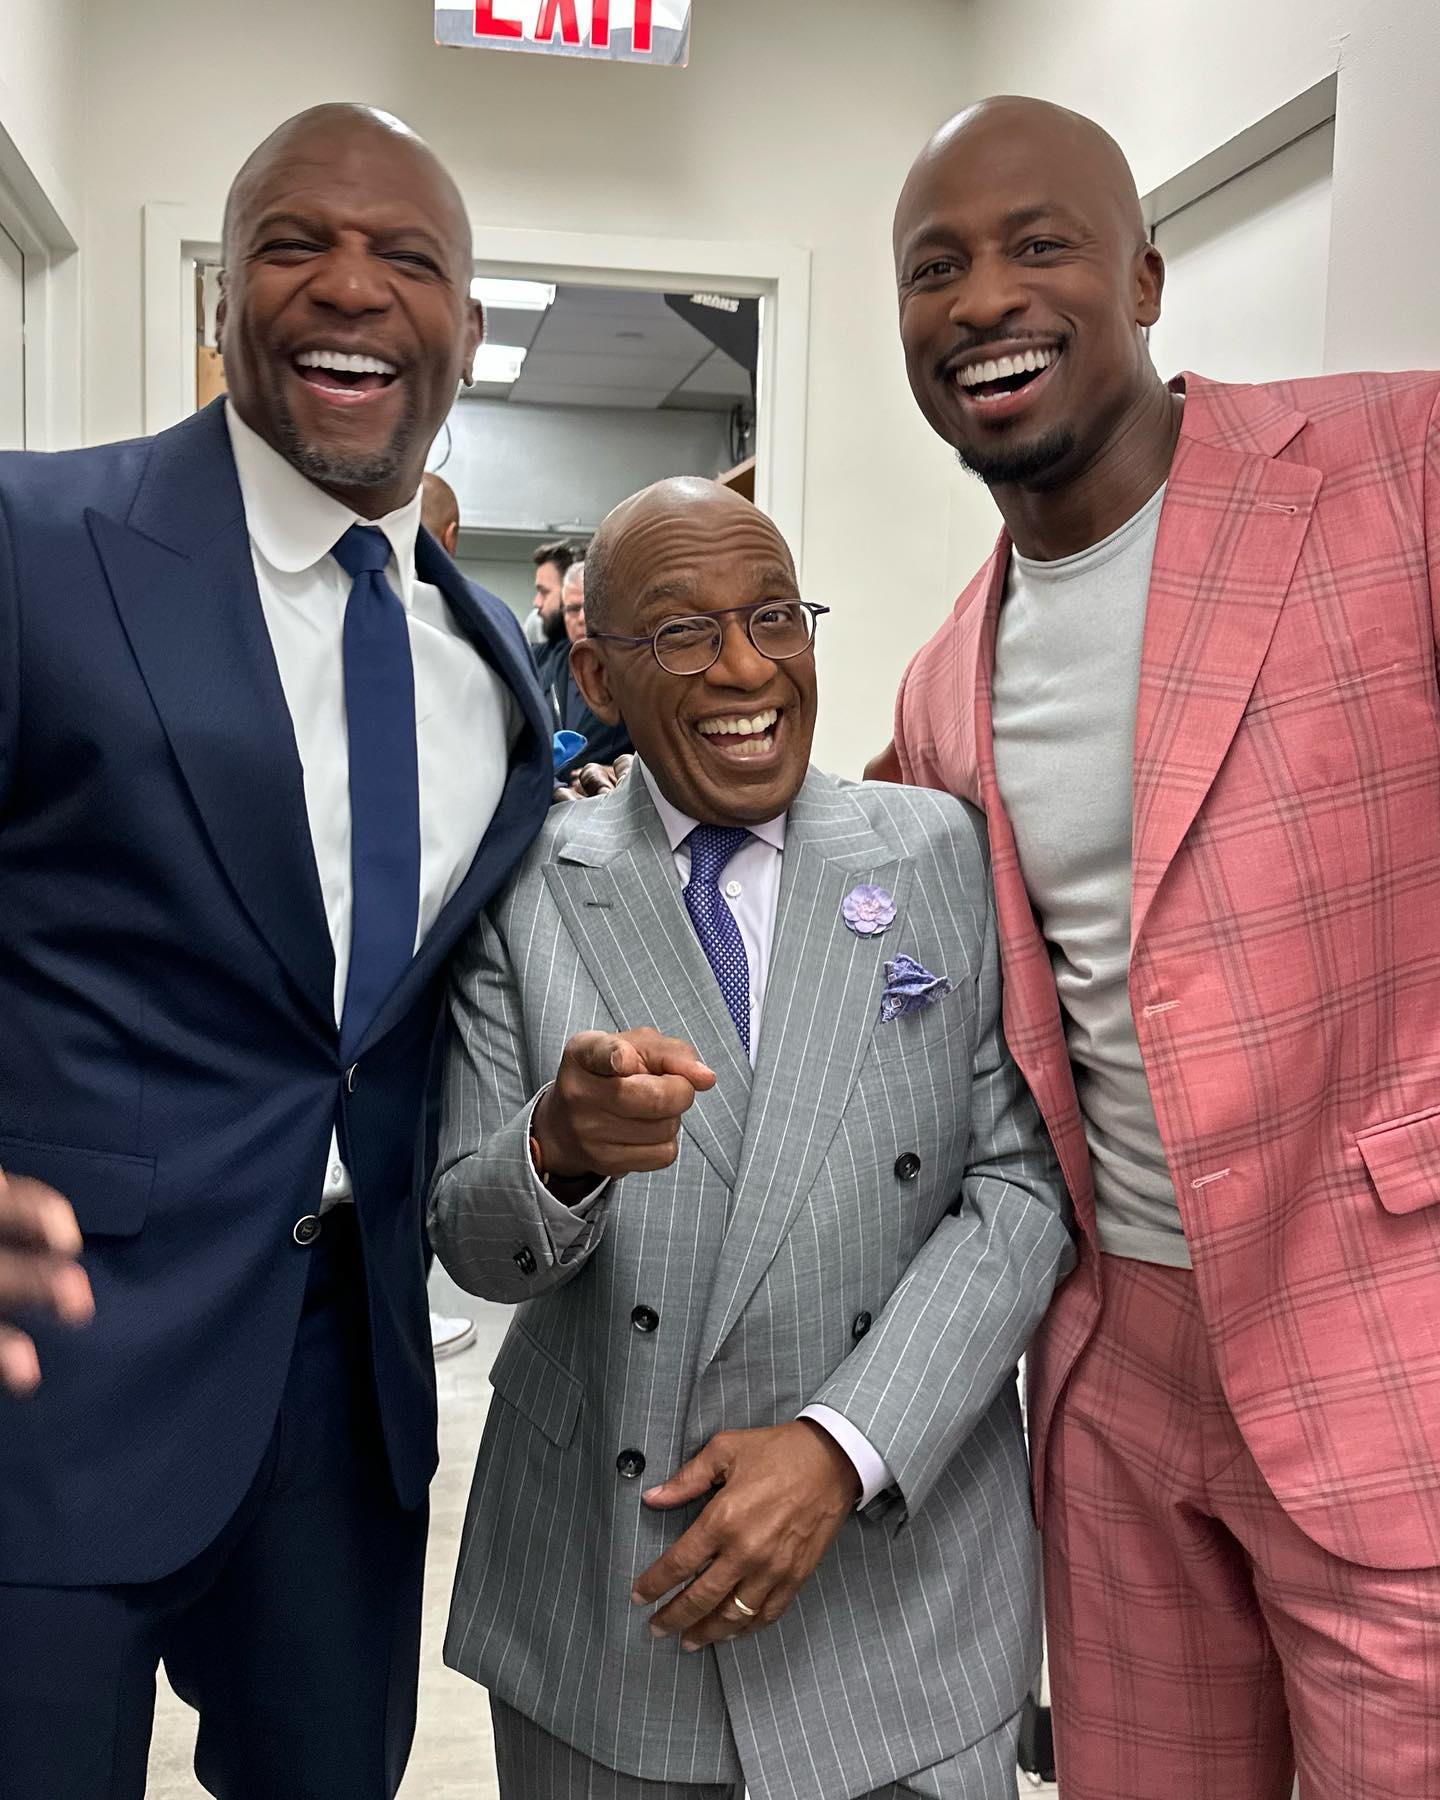 GMA fans shocked over Al Roker's real height in new photo with AGT's Terry Crews and The Talk's